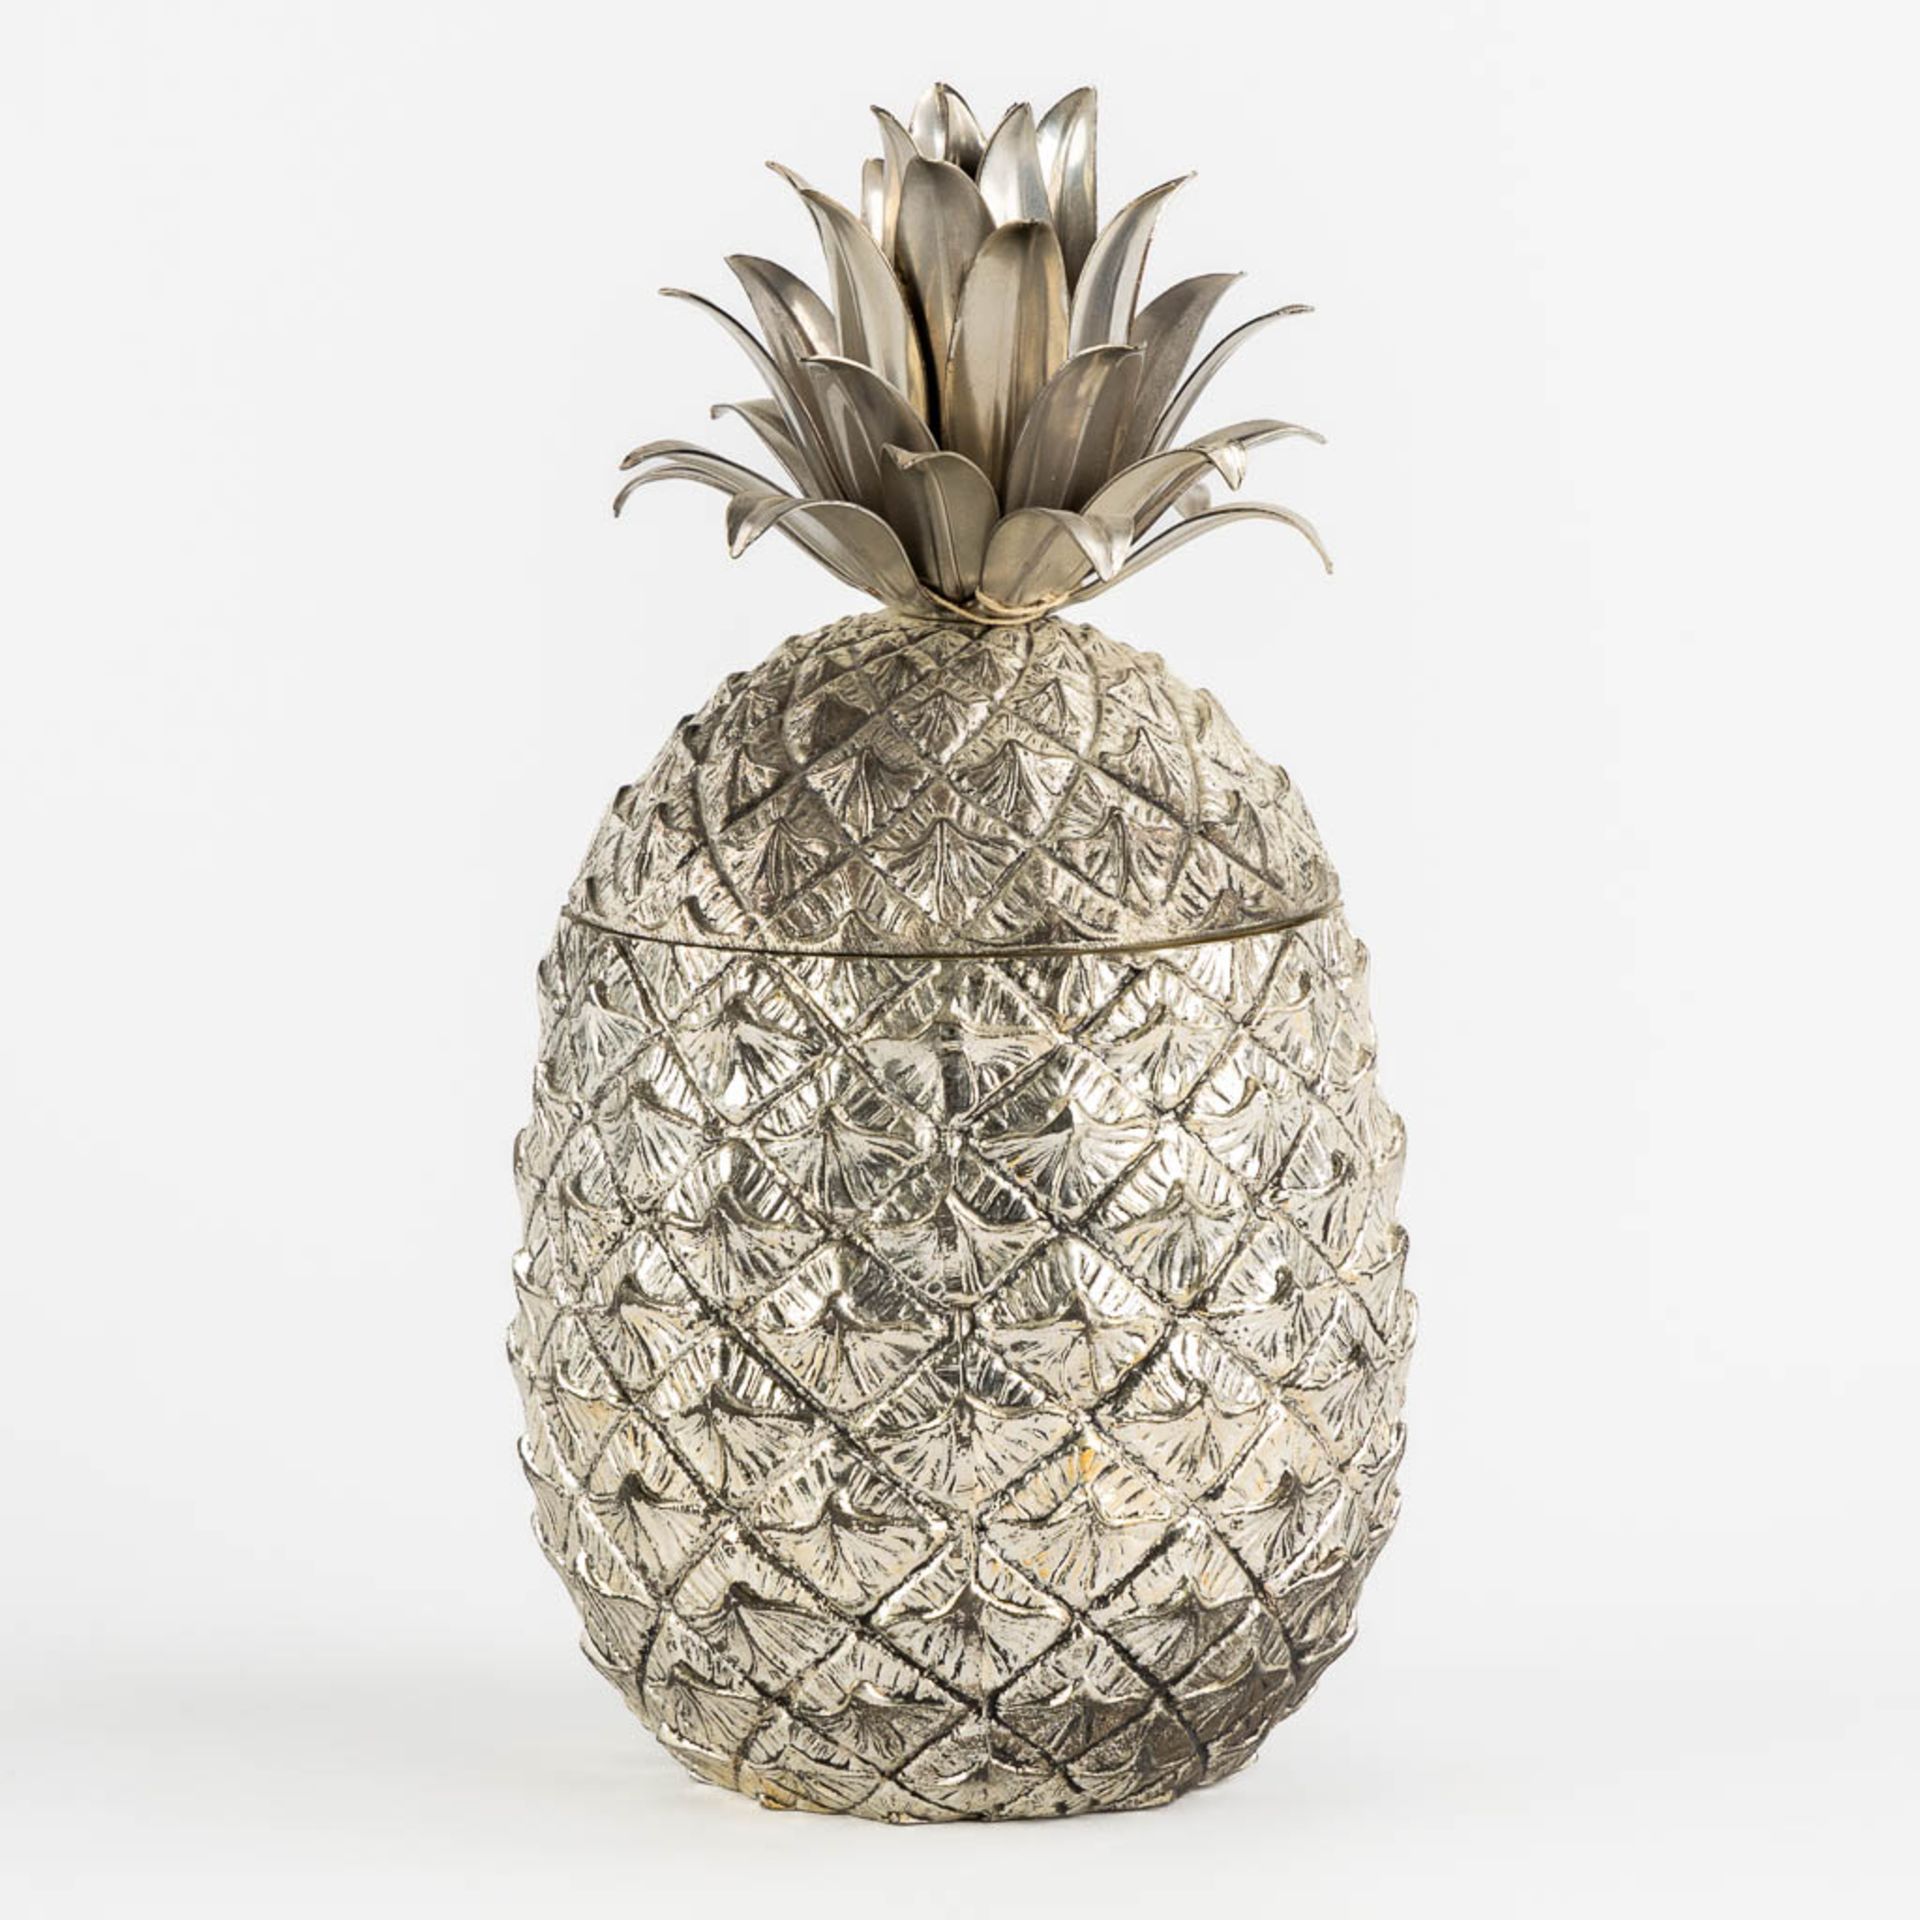 Mauro MANETTI (XX) 'Pineapple' an ice pail. (H:24 x D:13 cm) - Image 4 of 11